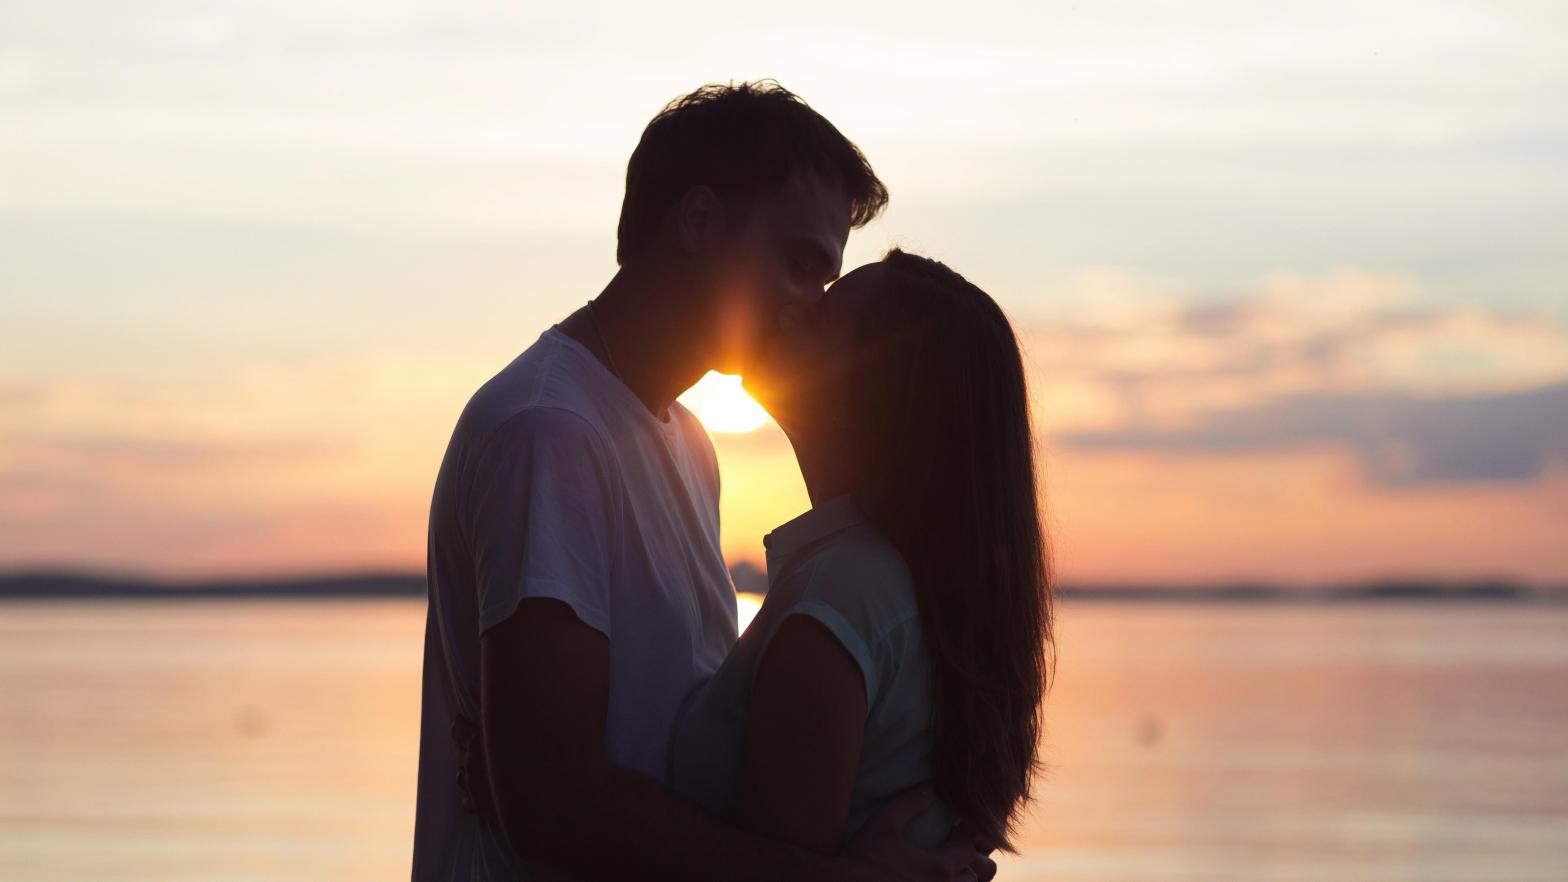 The kissing device was developed by a college student in China as early as 2019.  (Image: Diana Reentovich, Shutterstock)